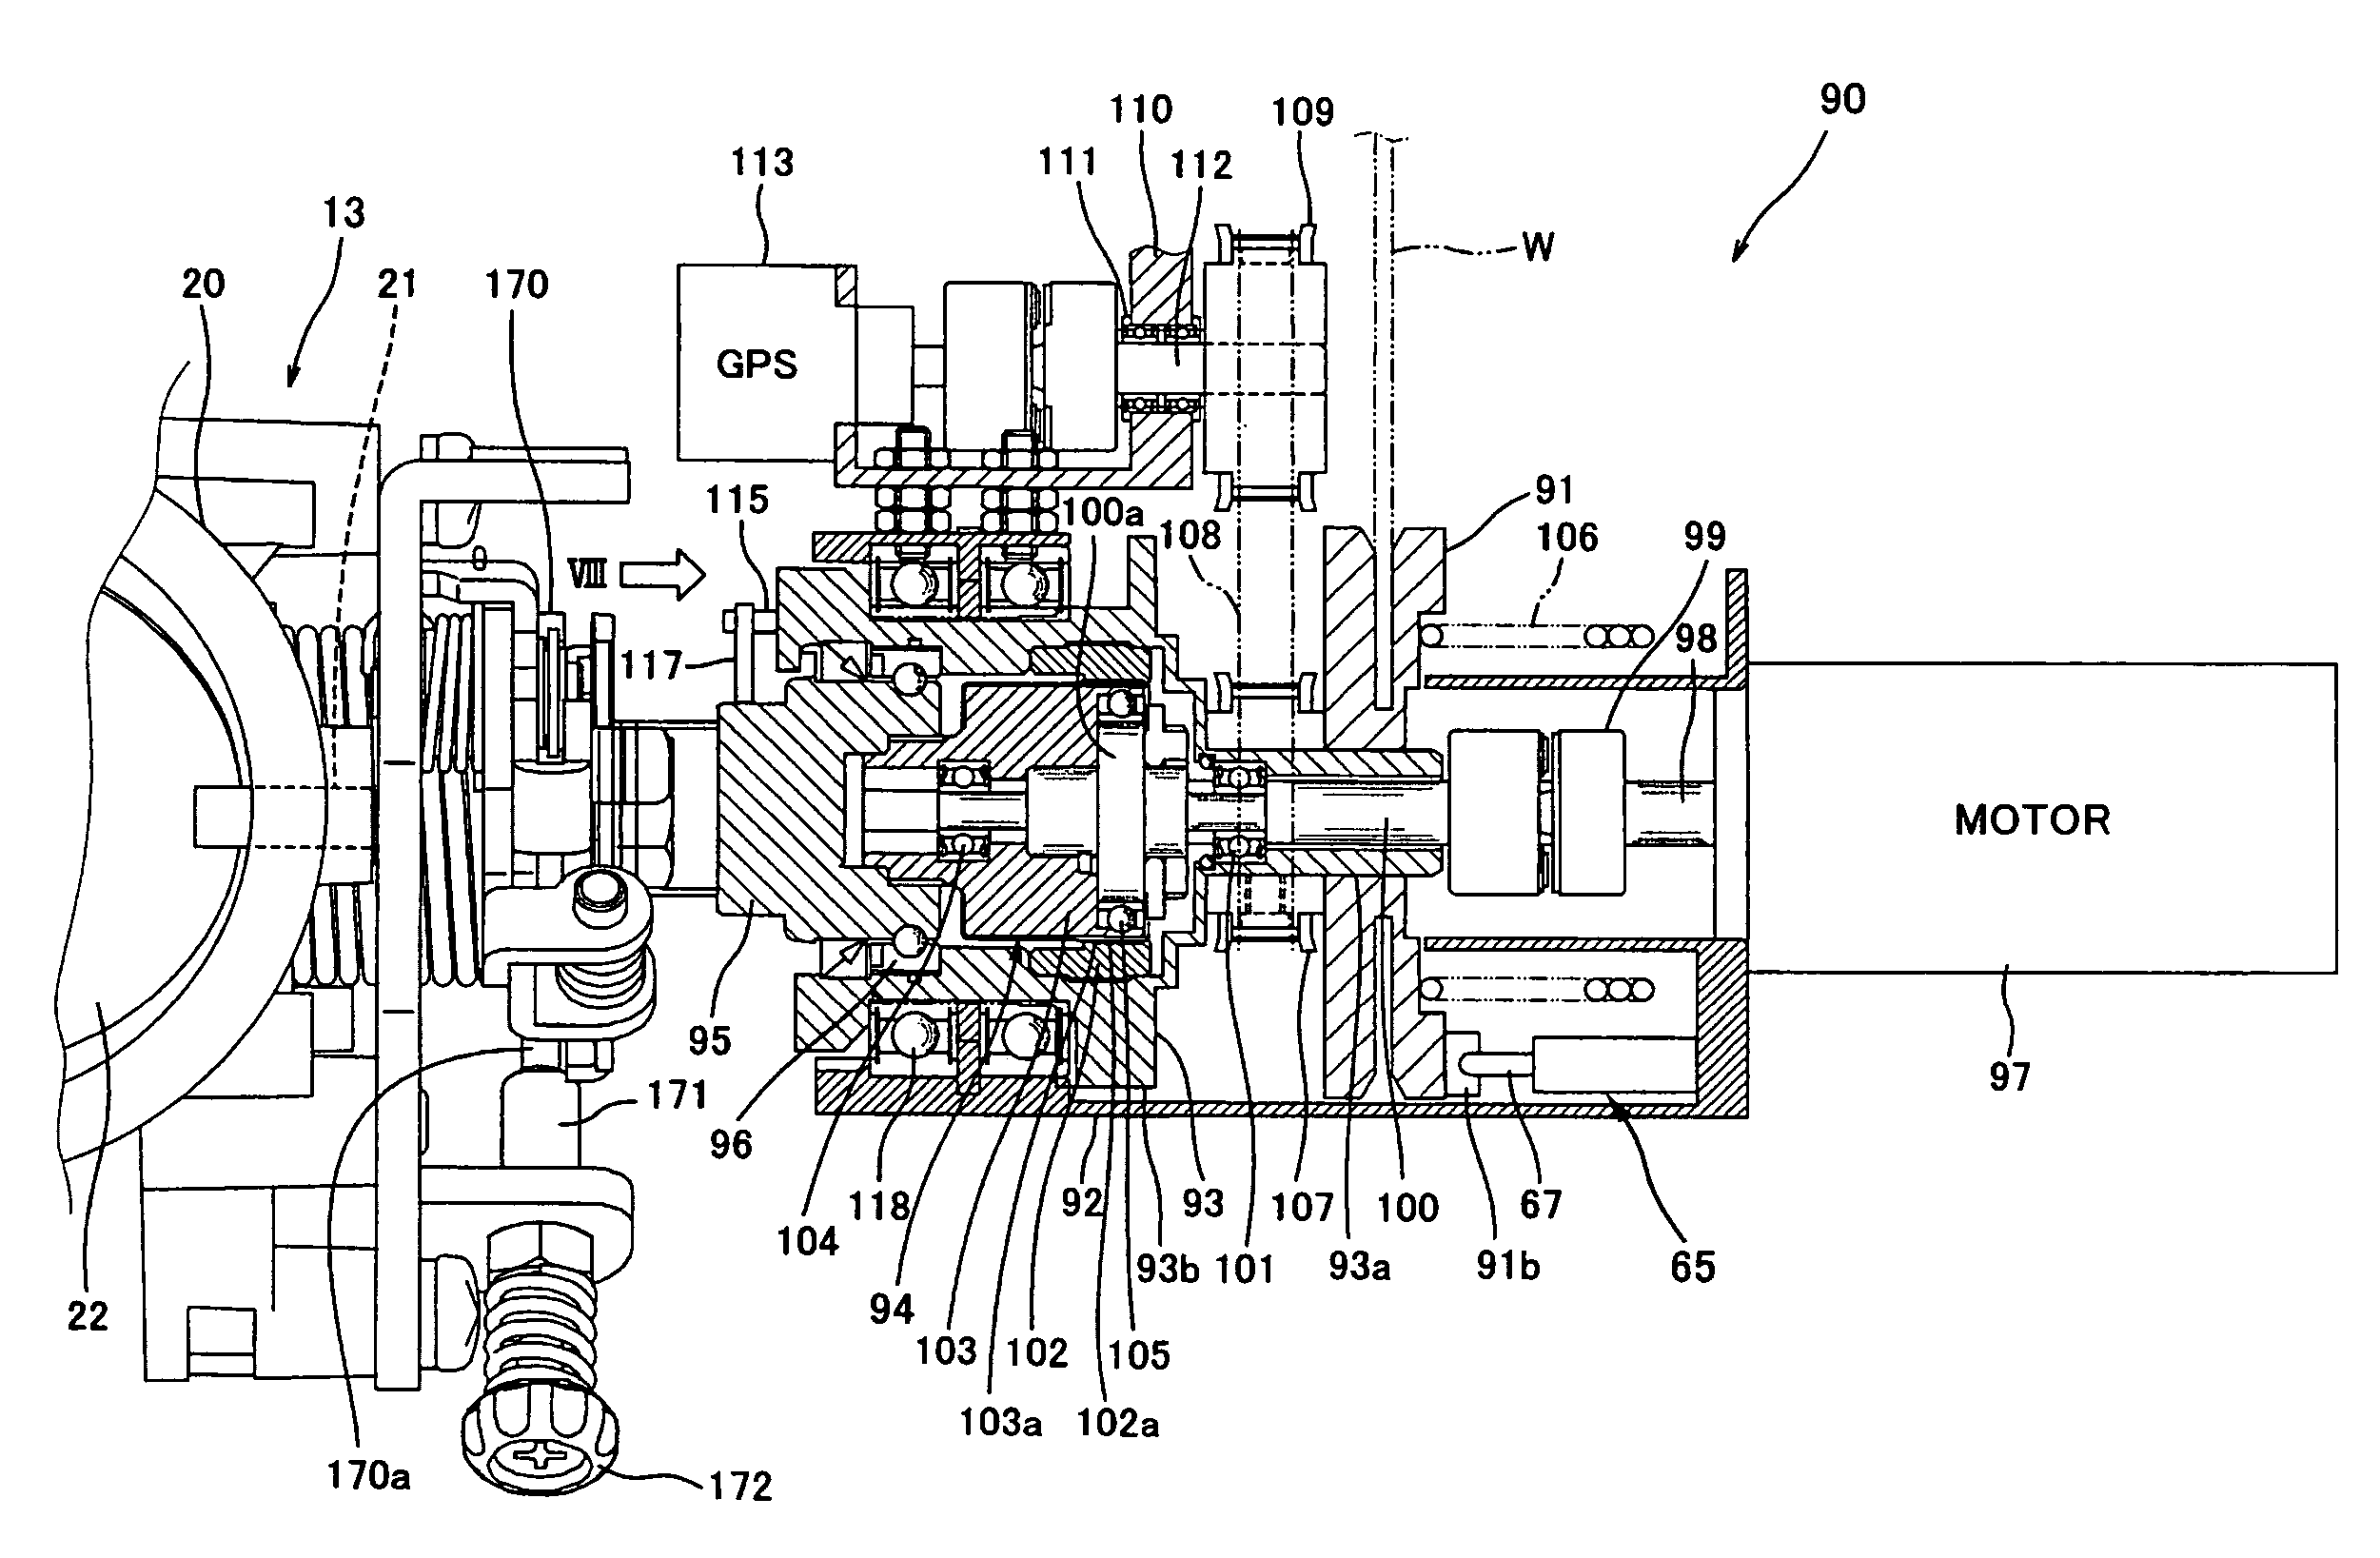 Throttle valve controller and engine